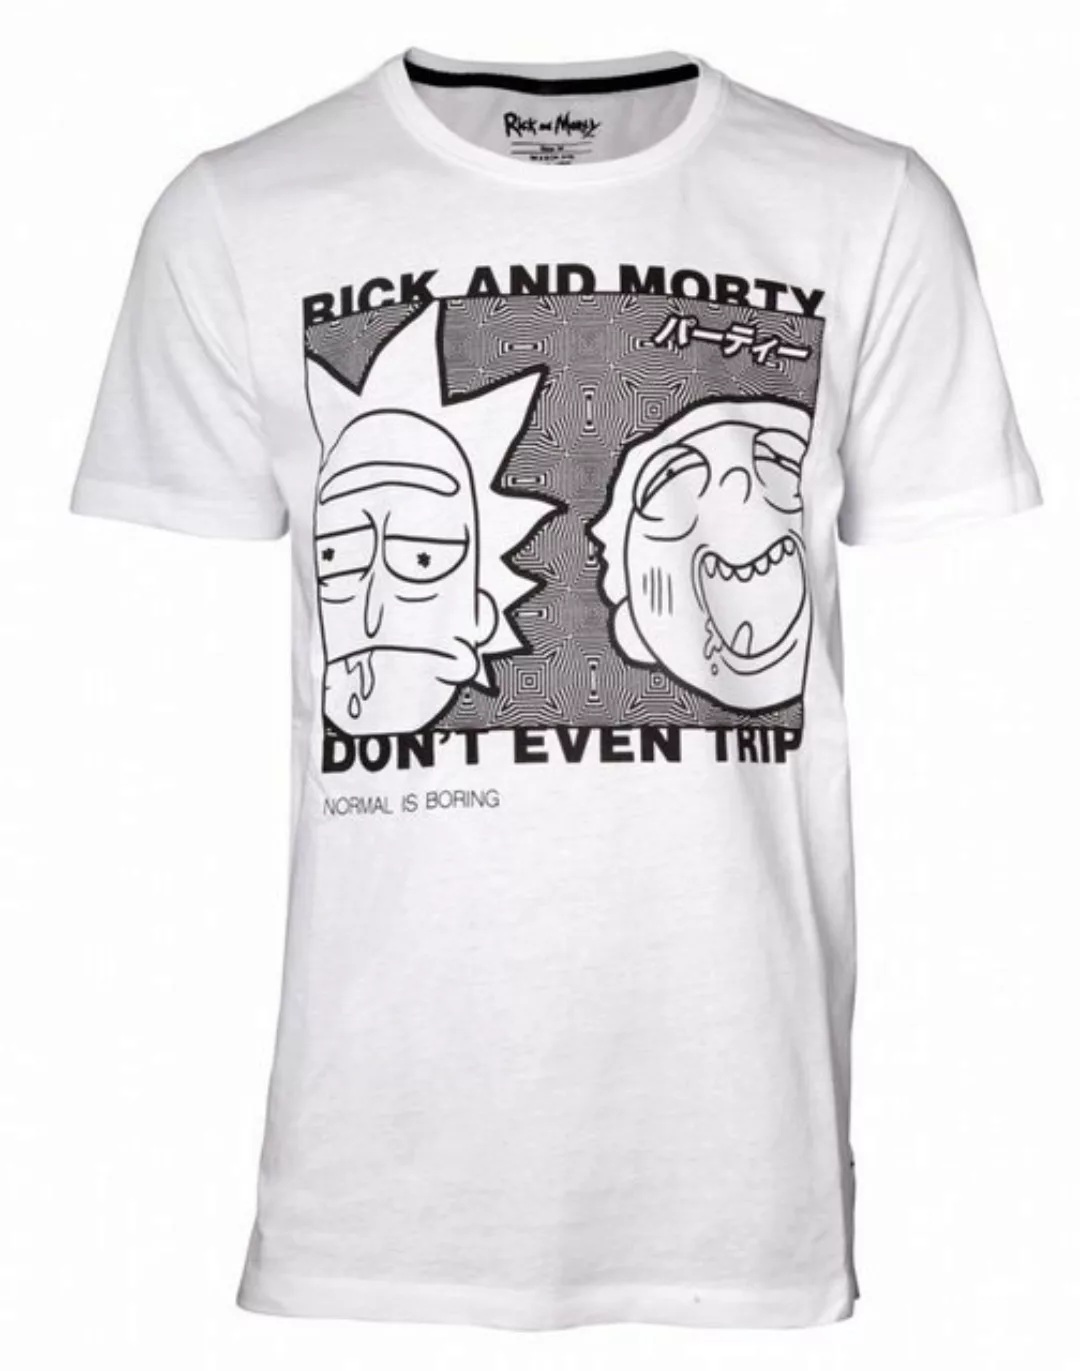 DIFUZED T-Shirt Rick and Morty - Don't even trip günstig online kaufen